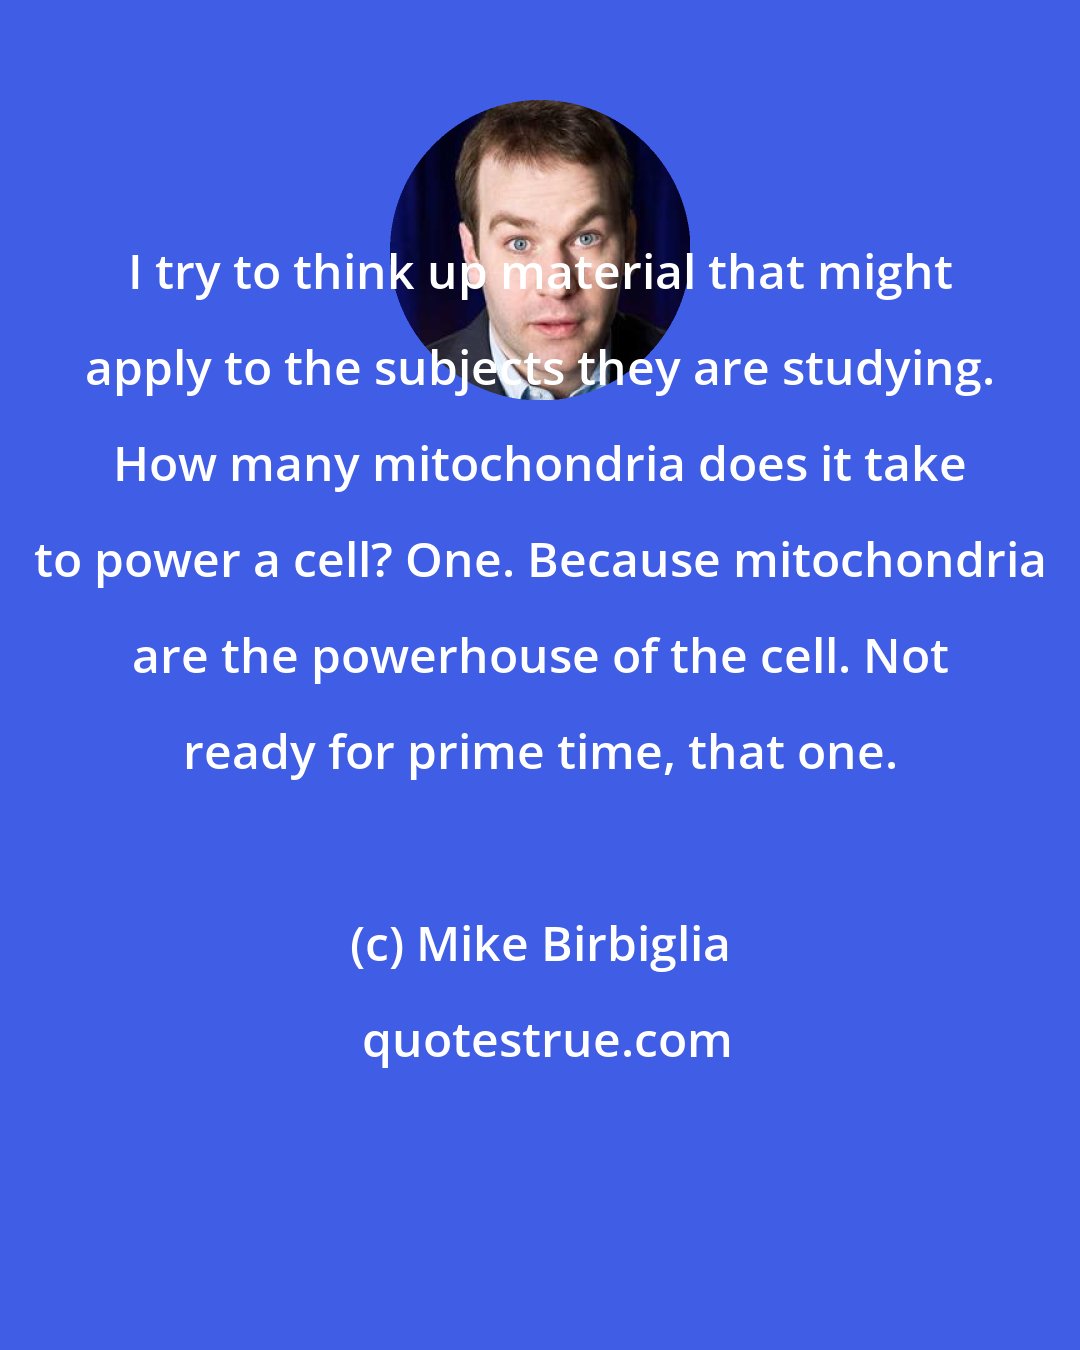 Mike Birbiglia: I try to think up material that might apply to the subjects they are studying. How many mitochondria does it take to power a cell? One. Because mitochondria are the powerhouse of the cell. Not ready for prime time, that one.